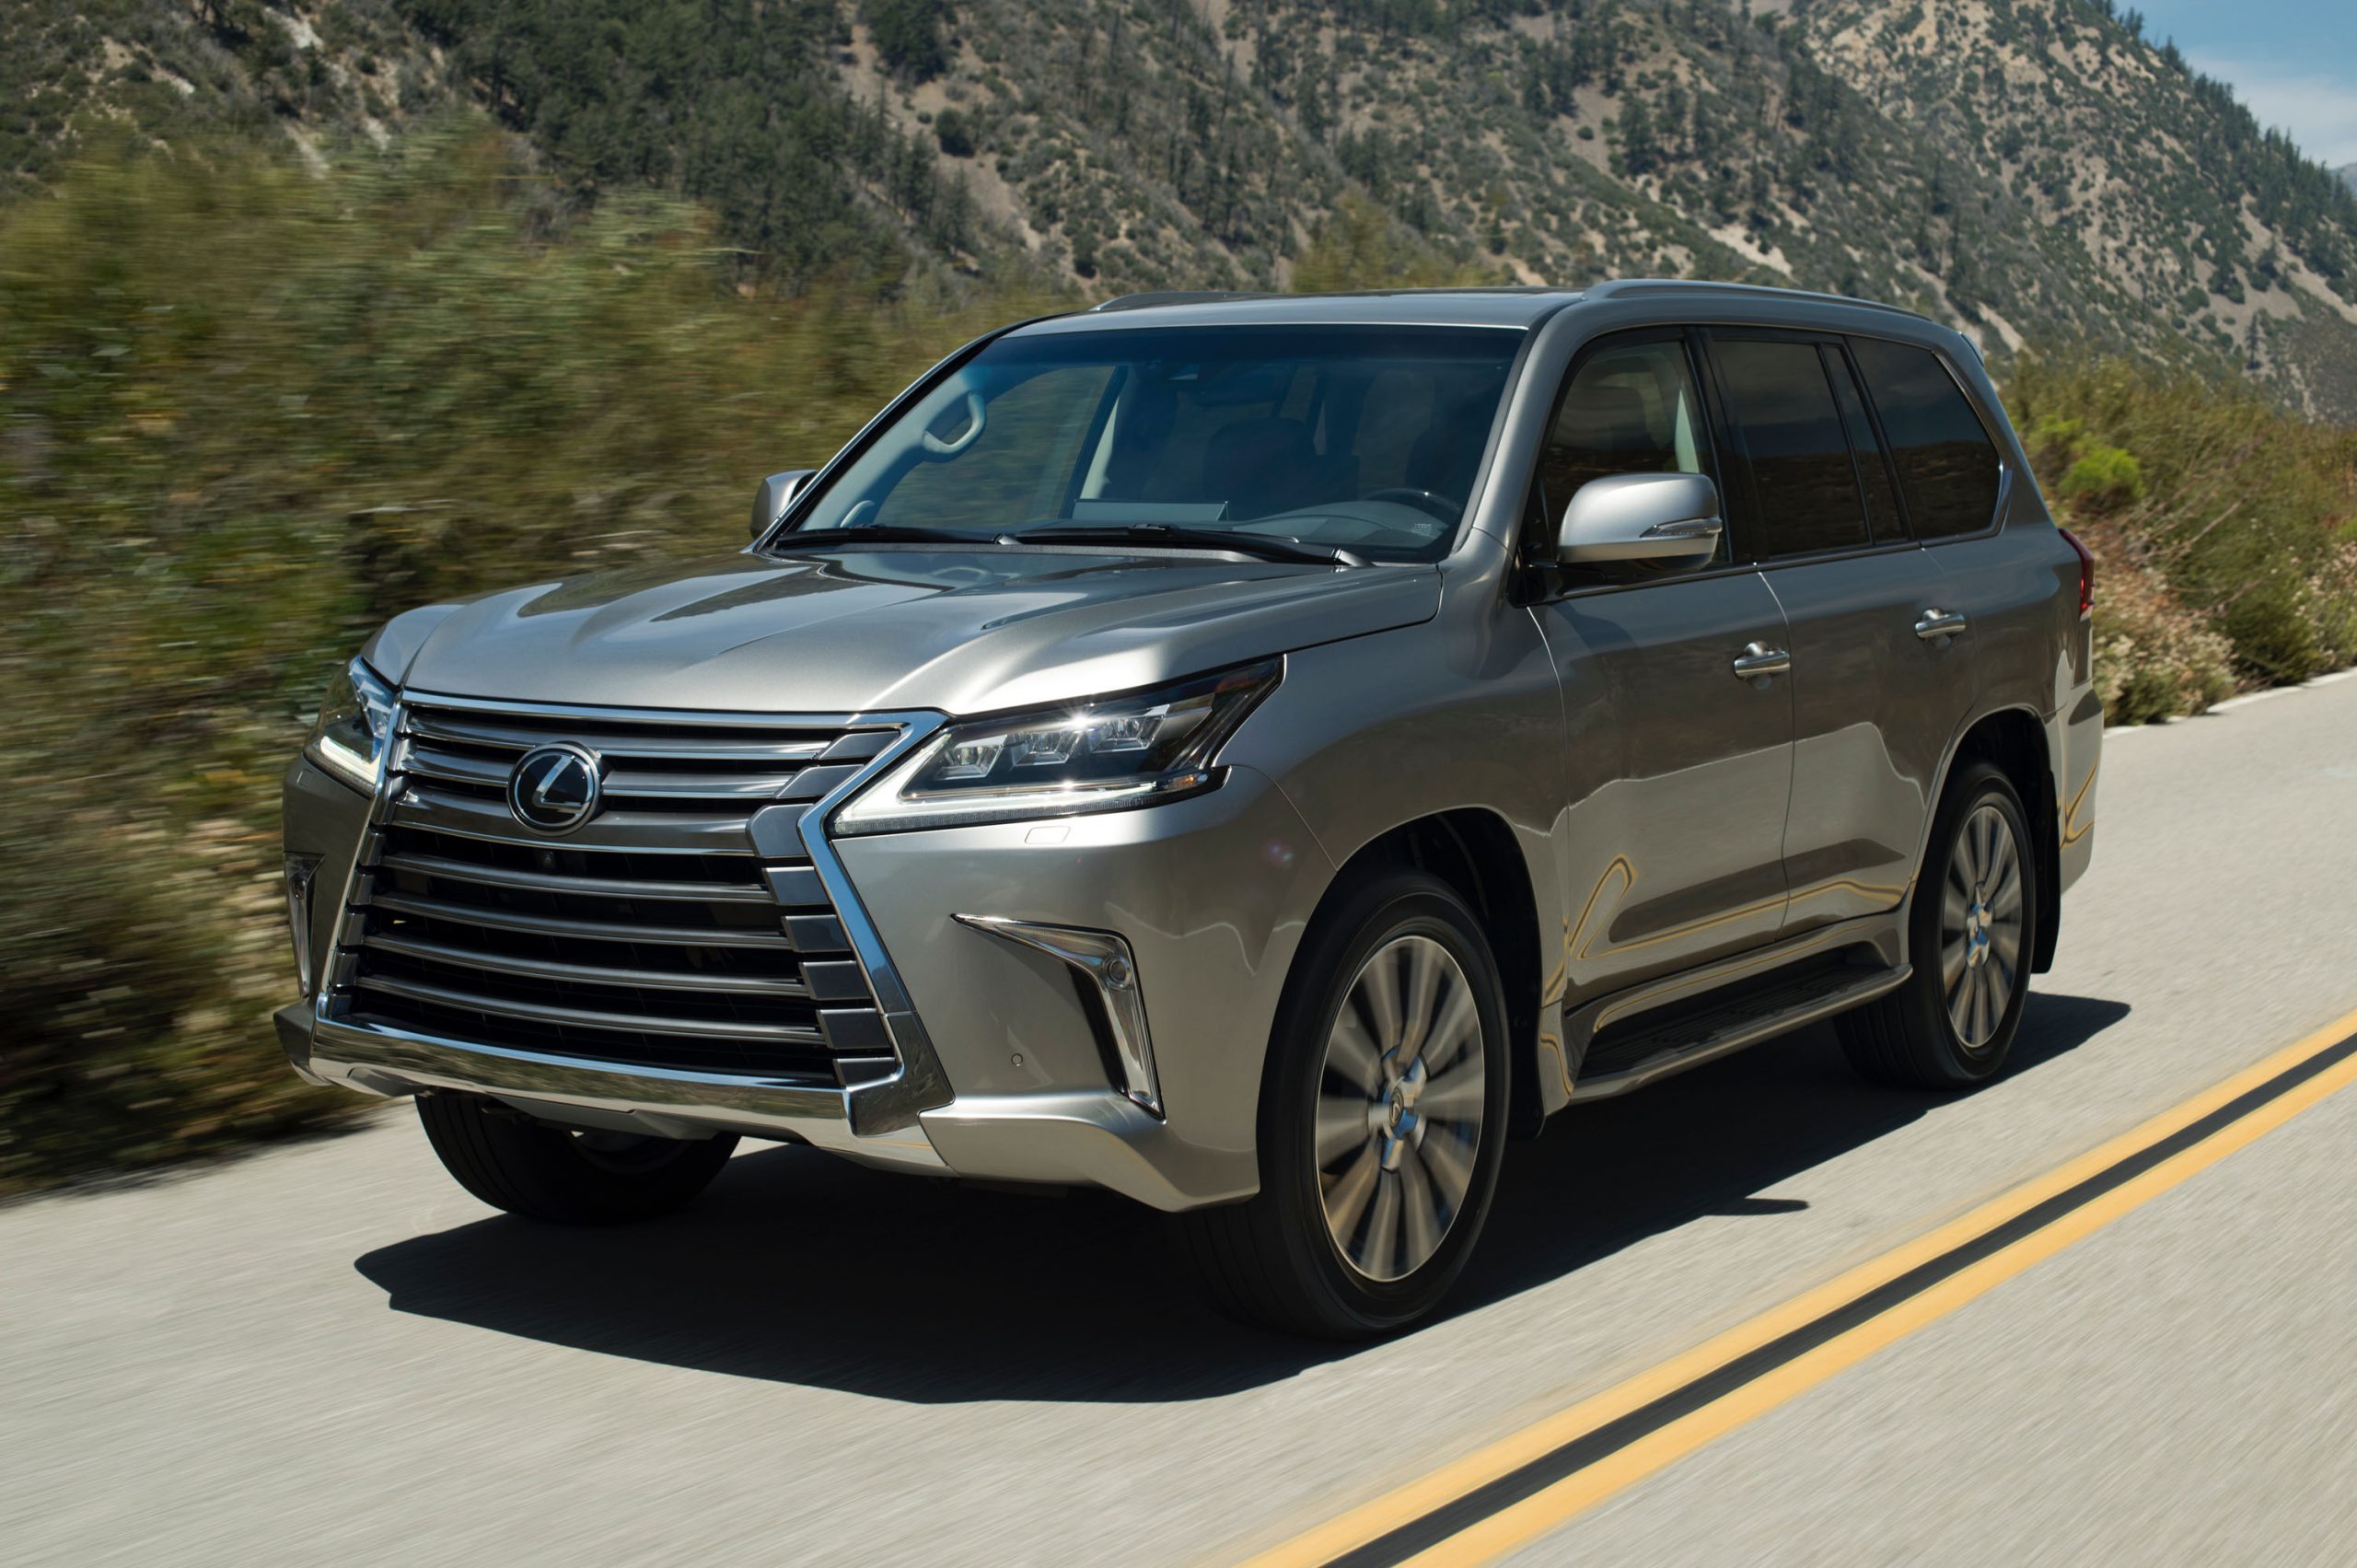 5 Reasons the 2020 Lexus LX570 Is Worth Its $100,000 Price Tag